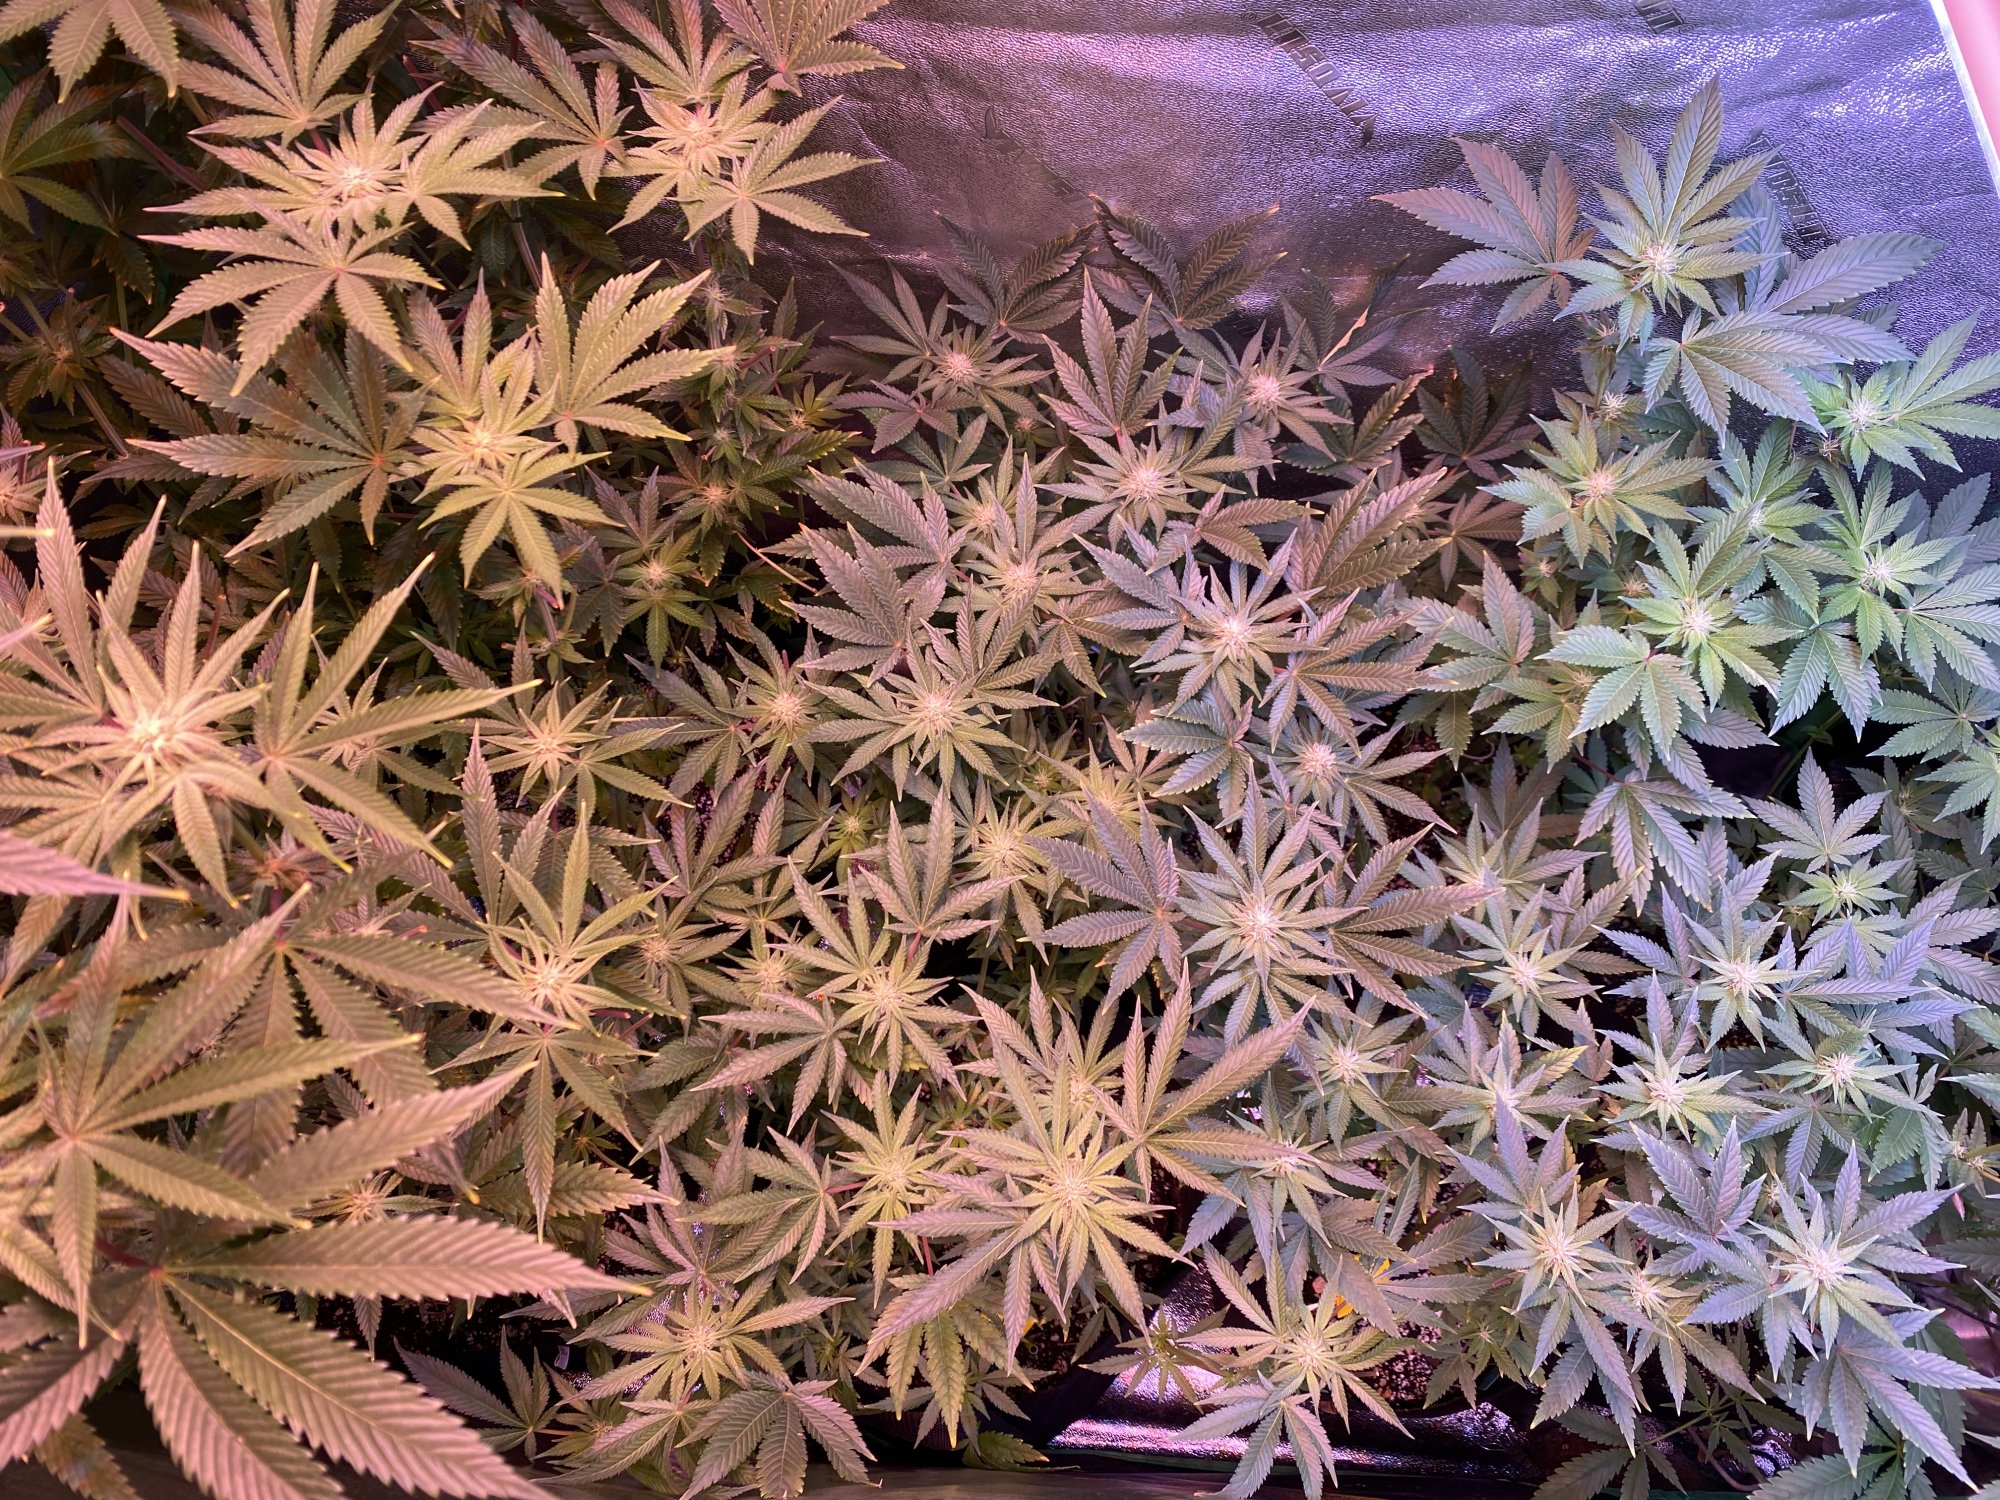 Day 35 of flower should i defoliate the top leaves